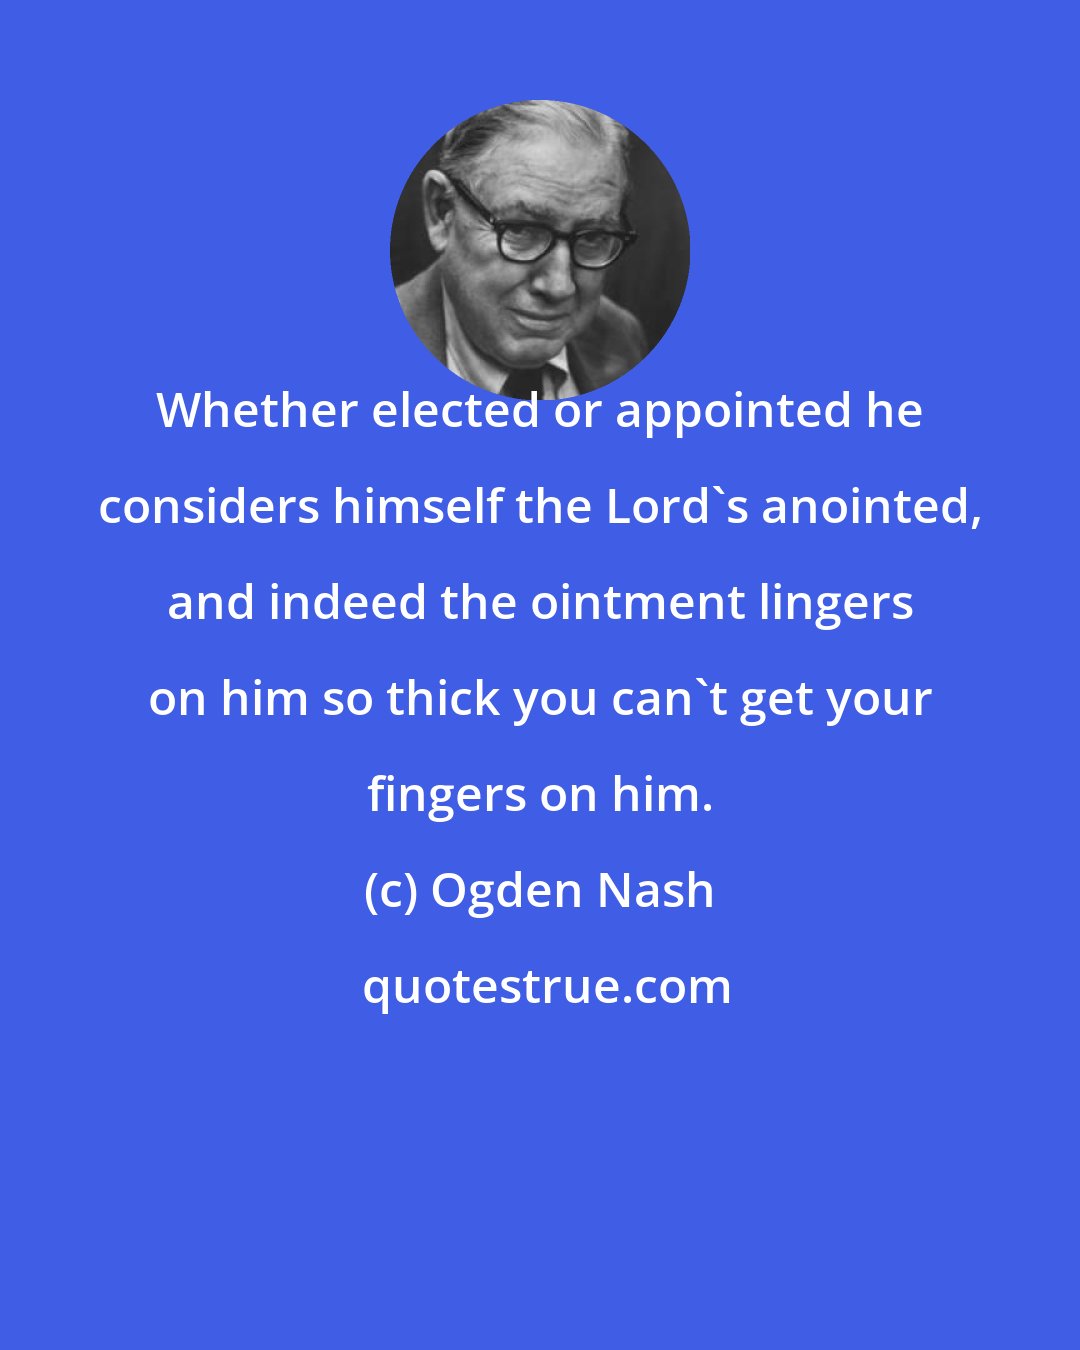 Ogden Nash: Whether elected or appointed he considers himself the Lord's anointed, and indeed the ointment lingers on him so thick you can't get your fingers on him.